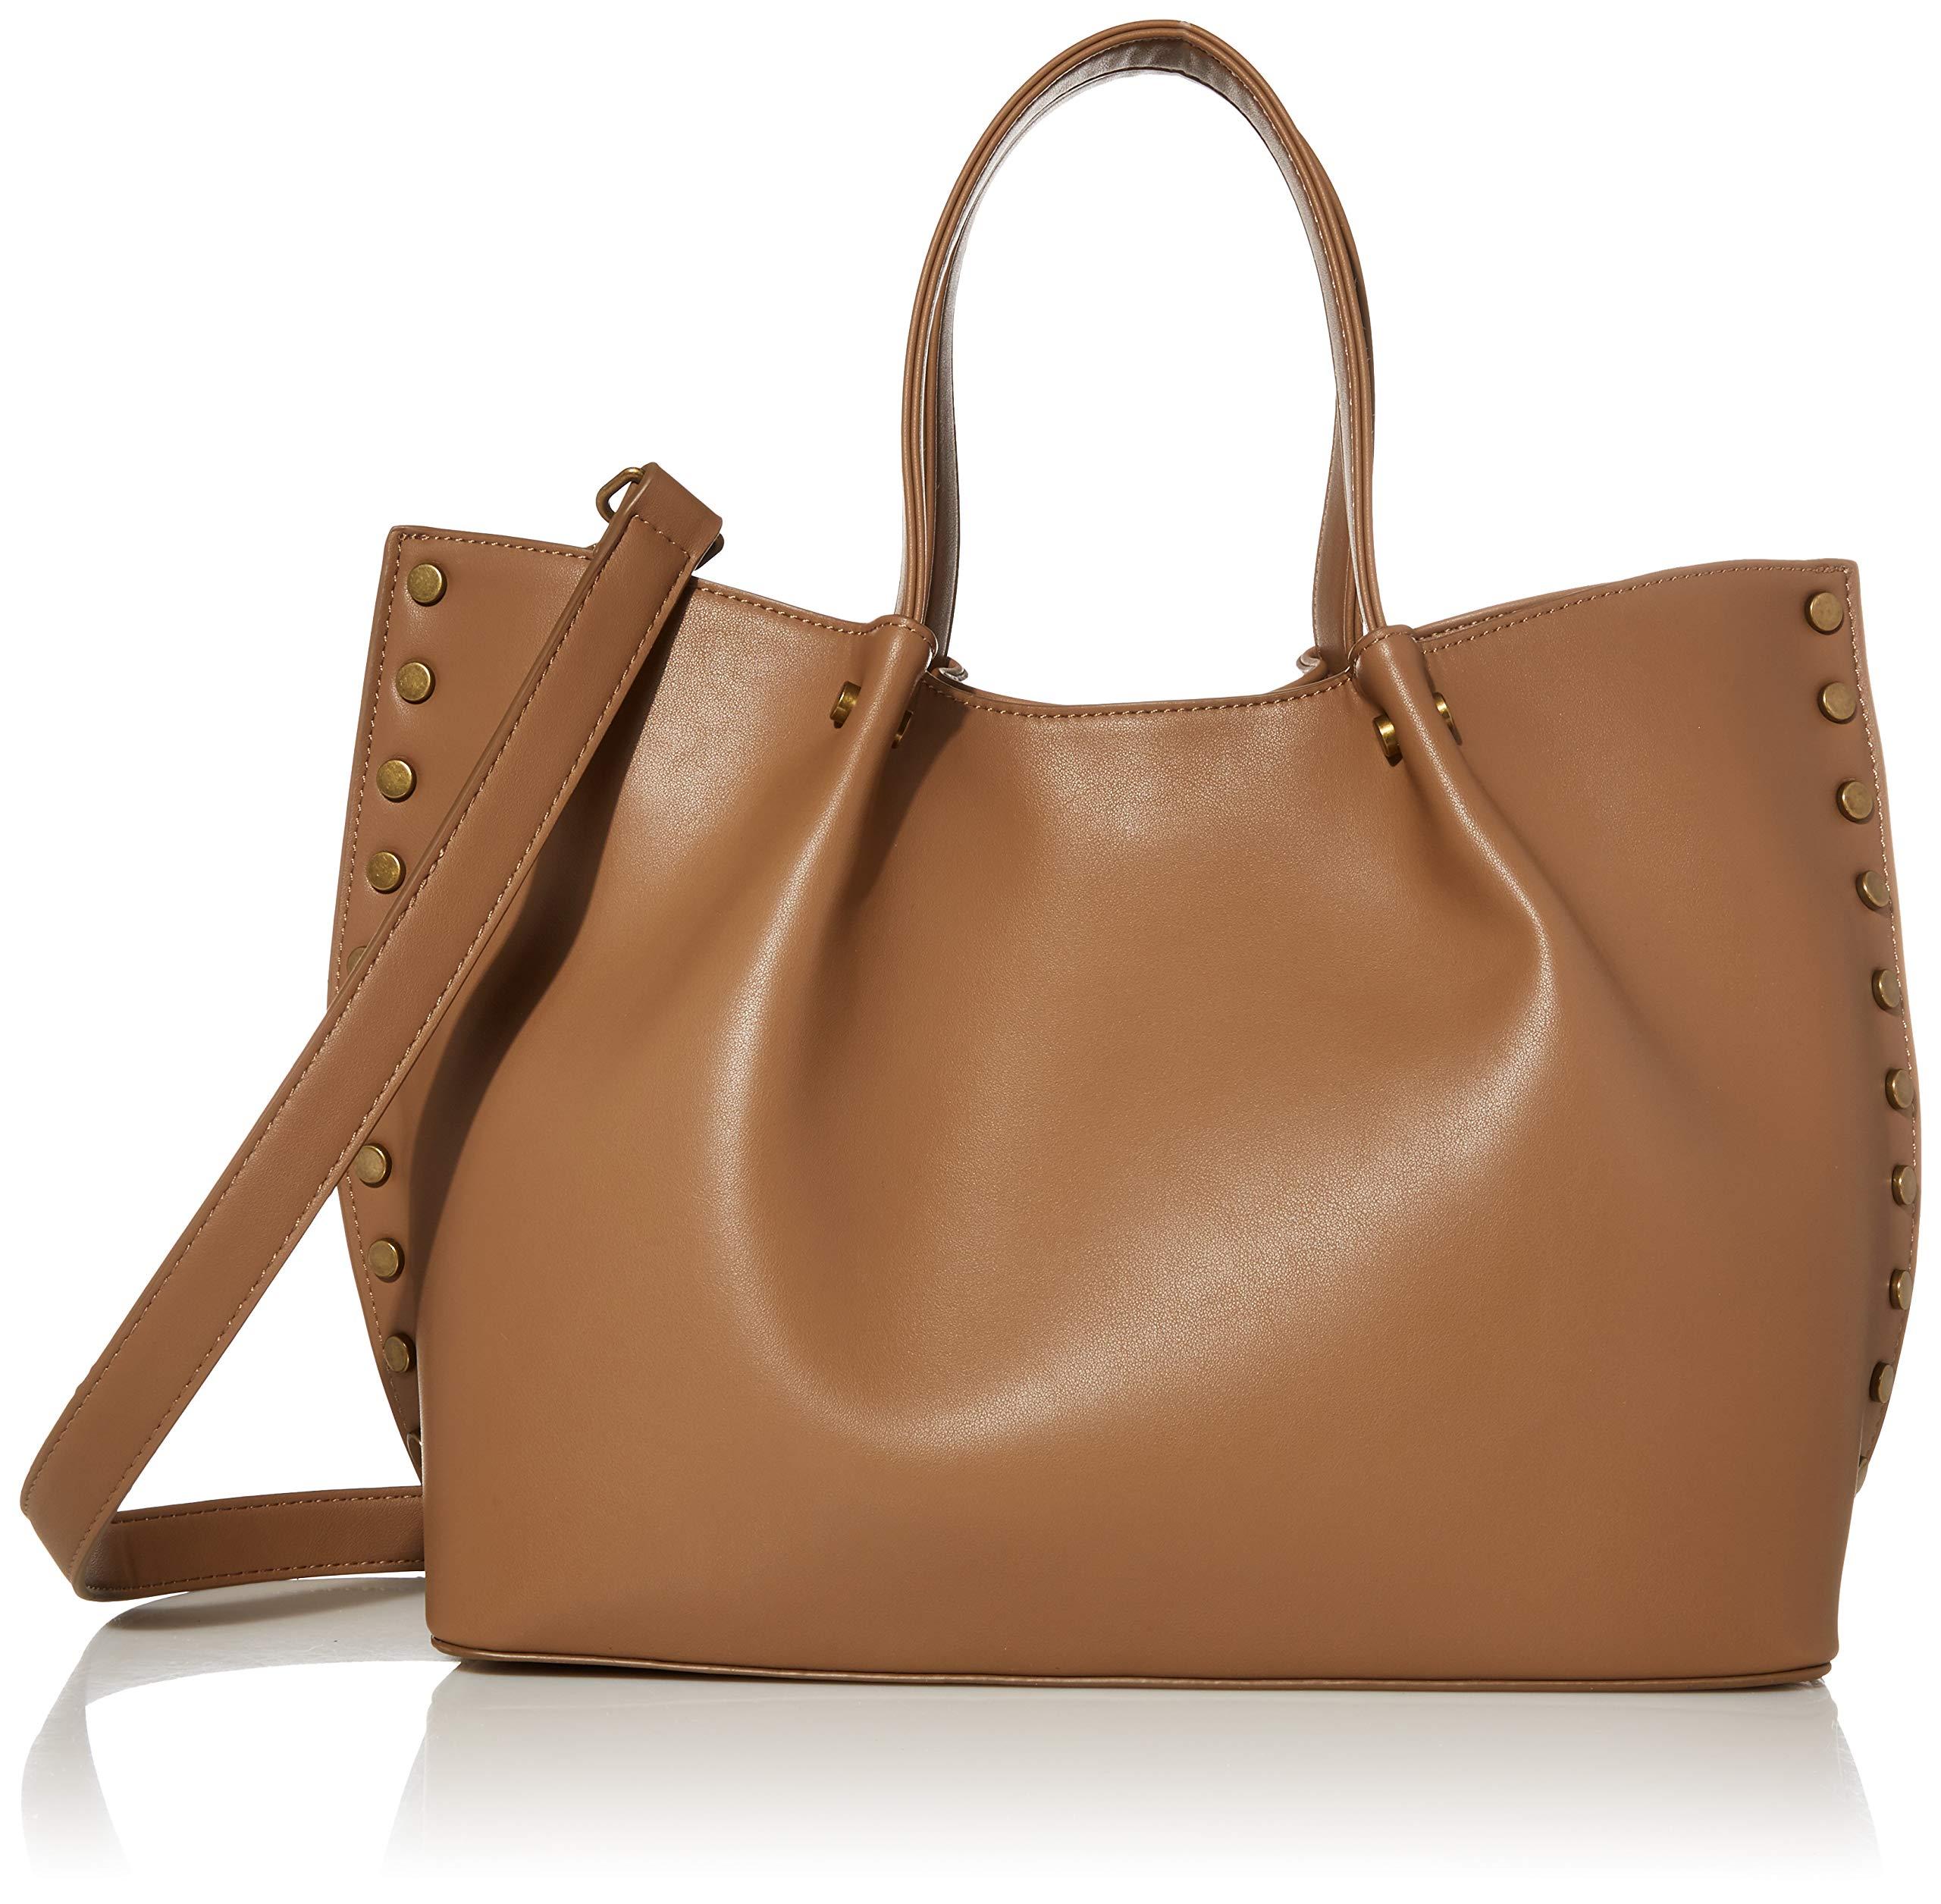 The Drop Hillary Tote Bag Accessory in Mushroom (Brown) - Lyst